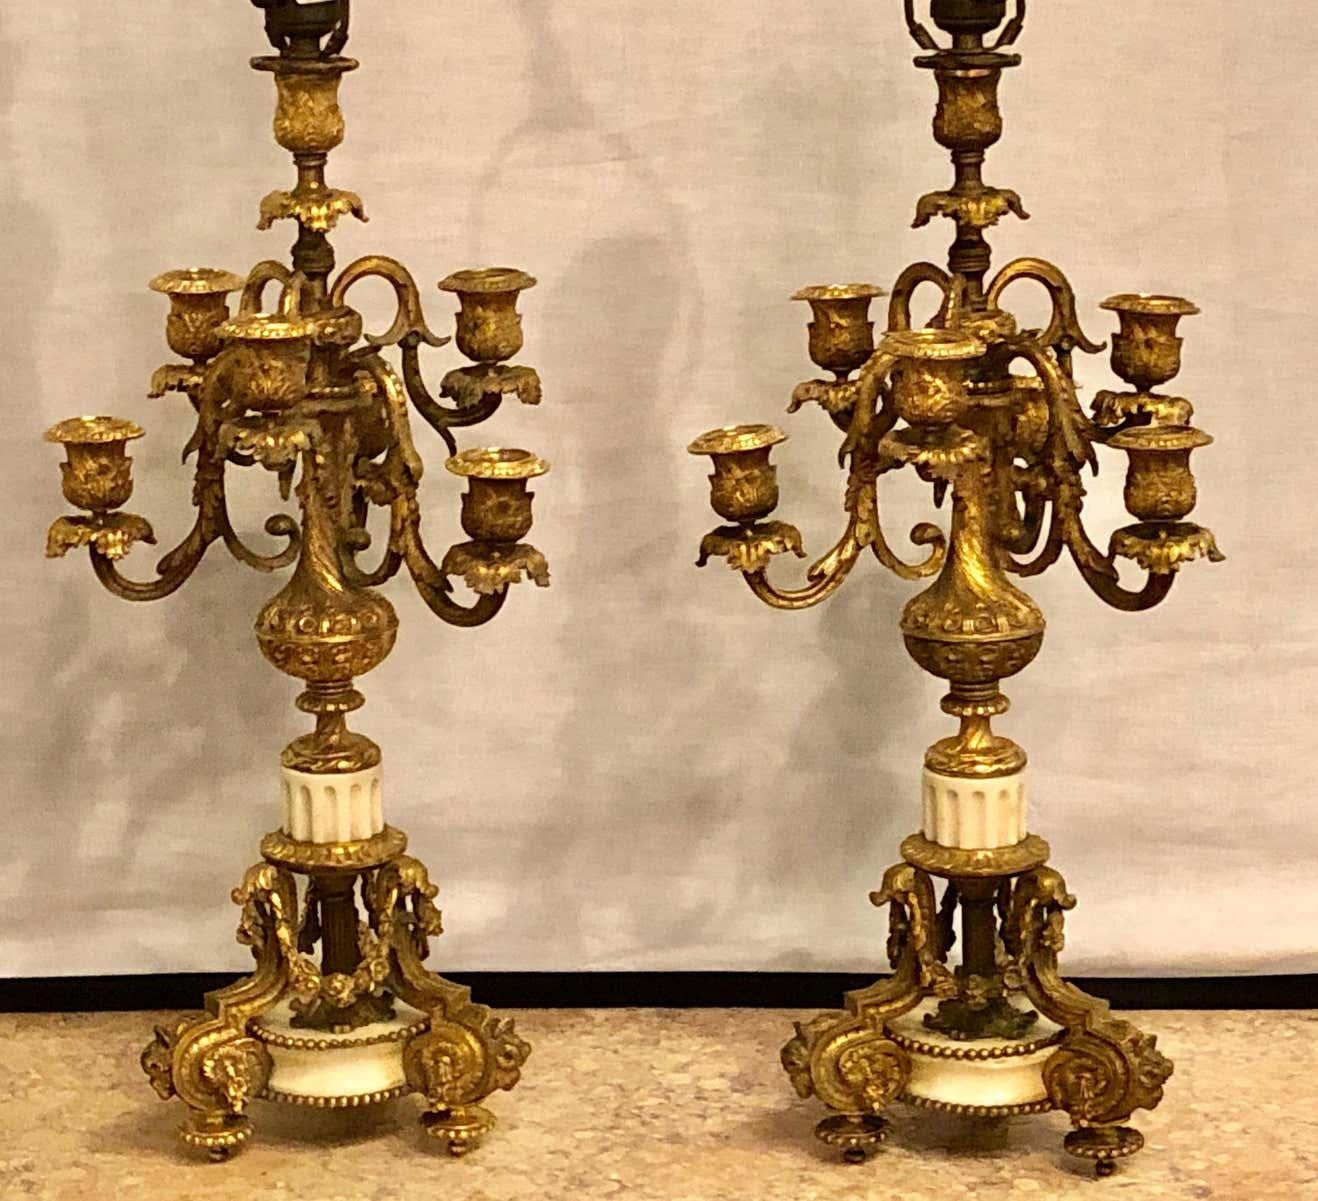 Pair of 19th century doré bronze 7-light marble base candelabras mounted as lamp. Each having bronze sabots leading to a white Carrara marble pedestal base that is bronze mounted with finely chased floral and swag design reminiscent of the early